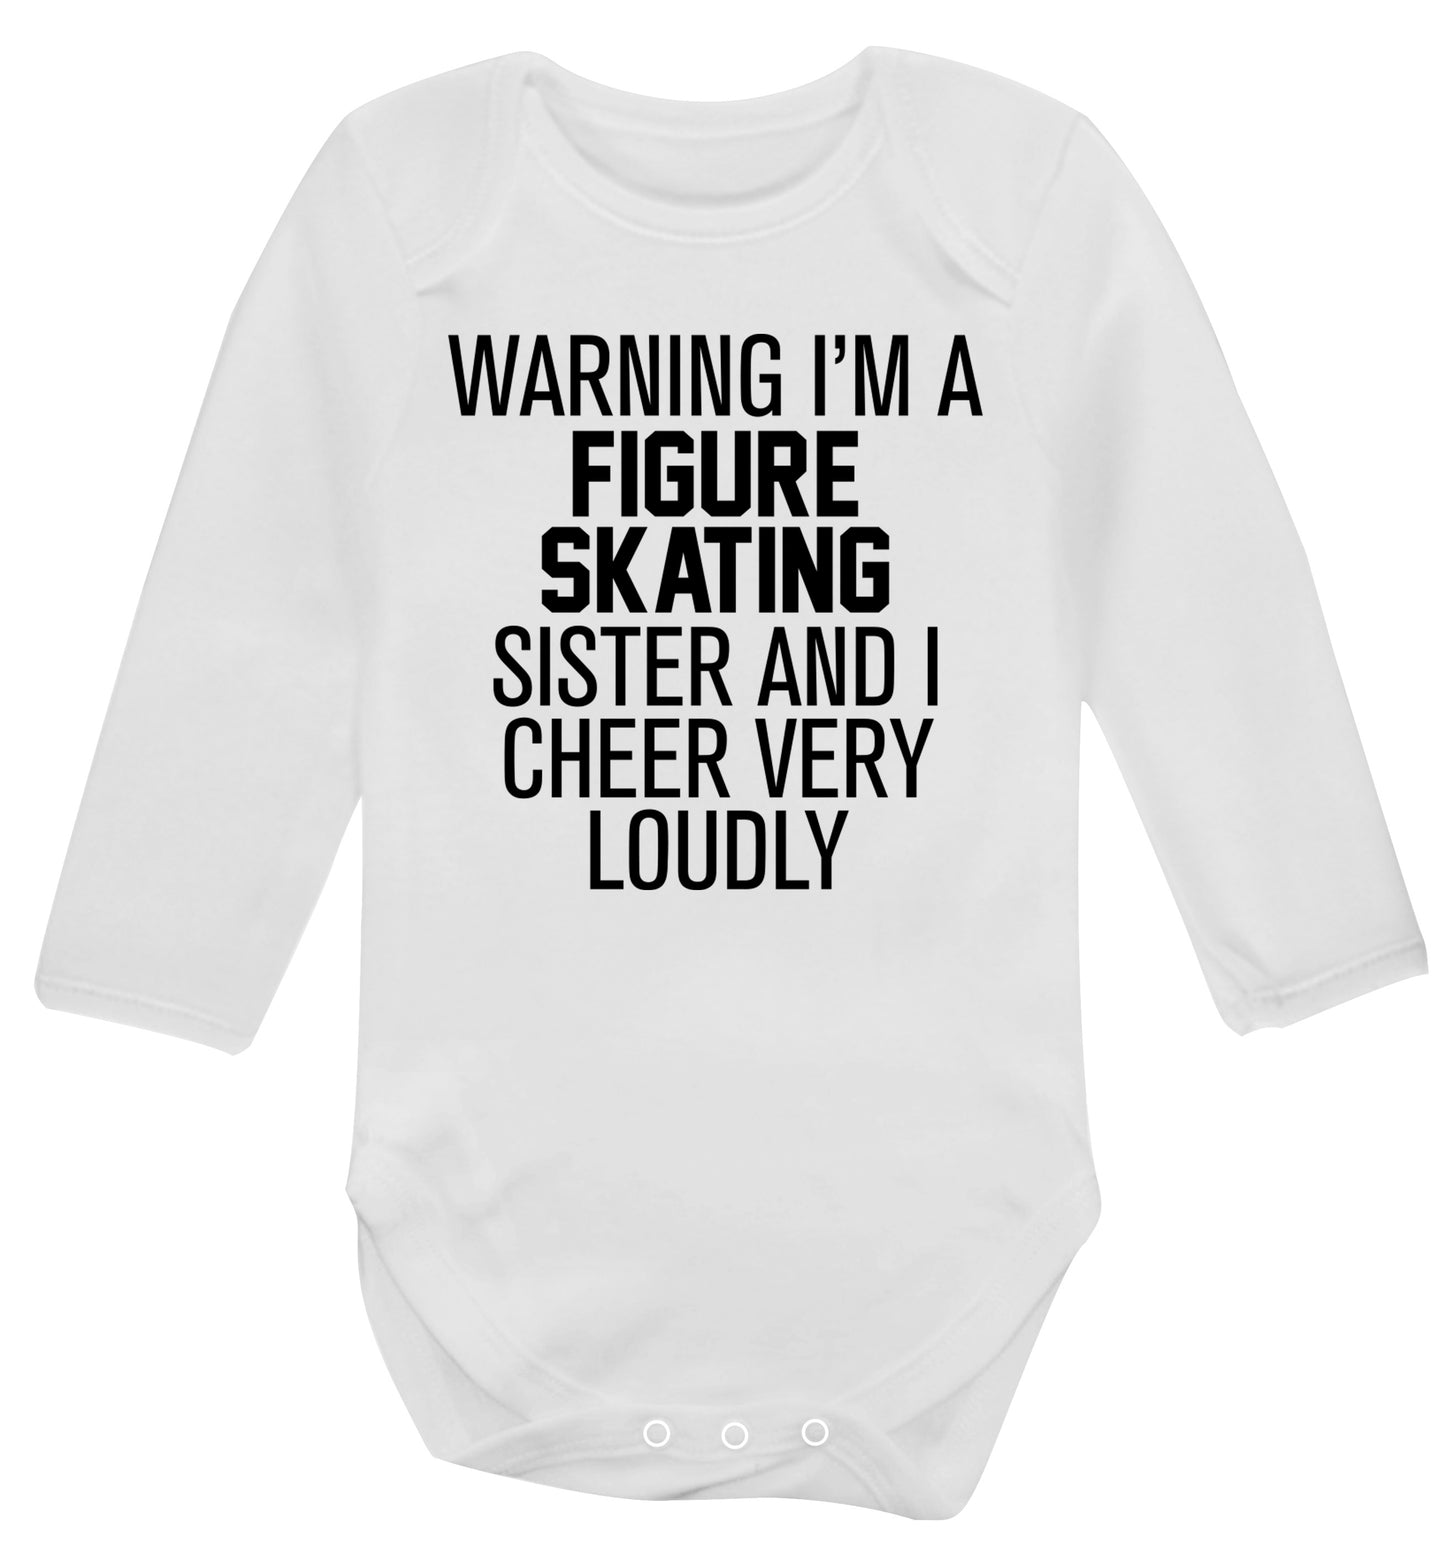 Warning I'm a figure skating sister and I cheer very loudly Baby Vest long sleeved white 6-12 months